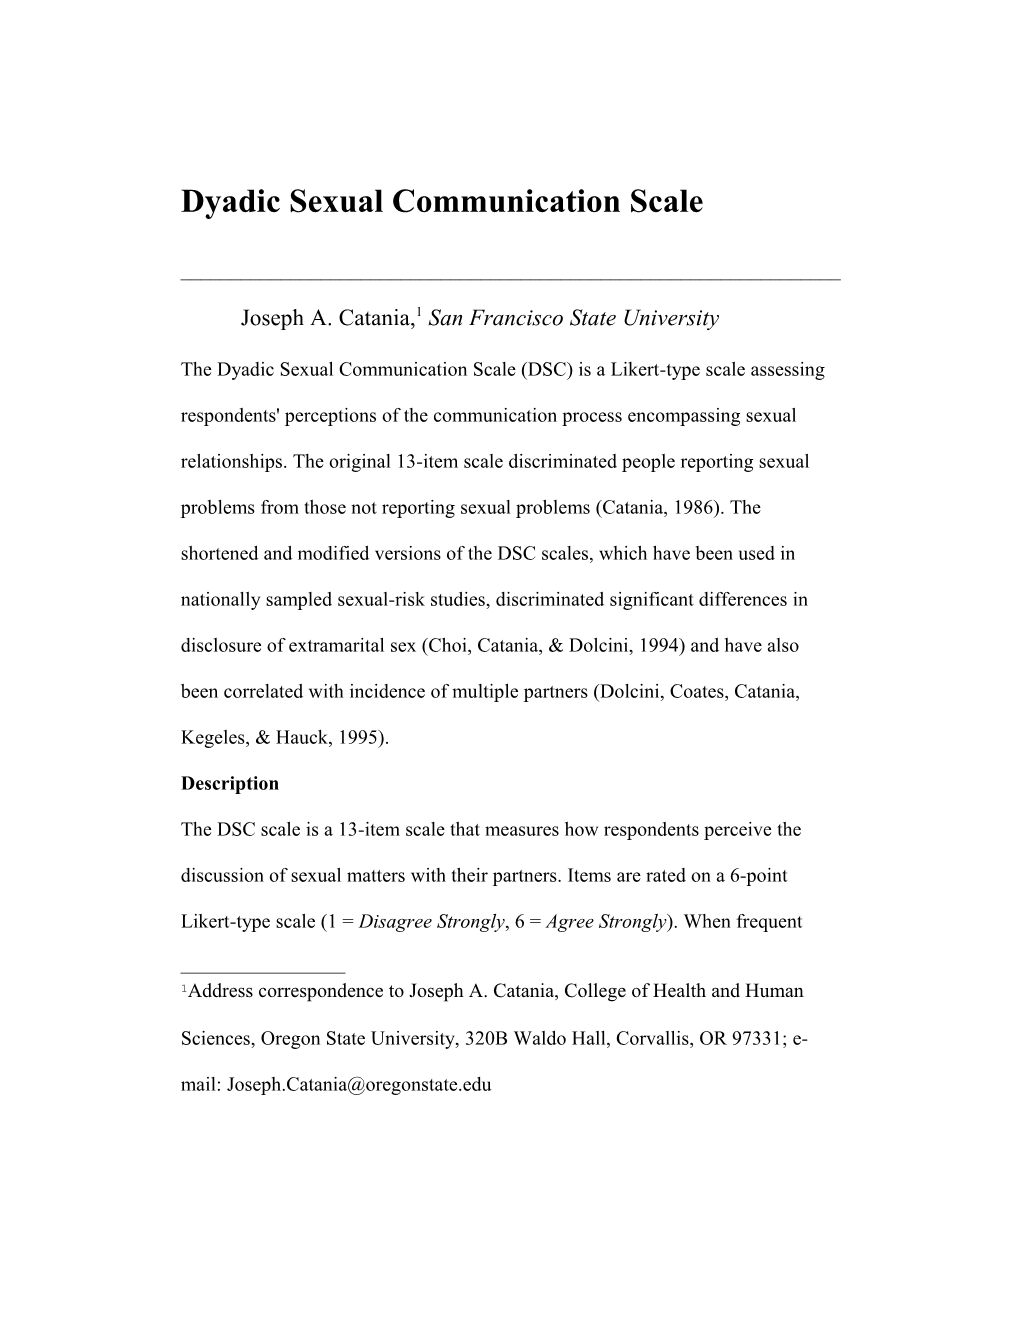 The Dyadic Sexual Communication Scale